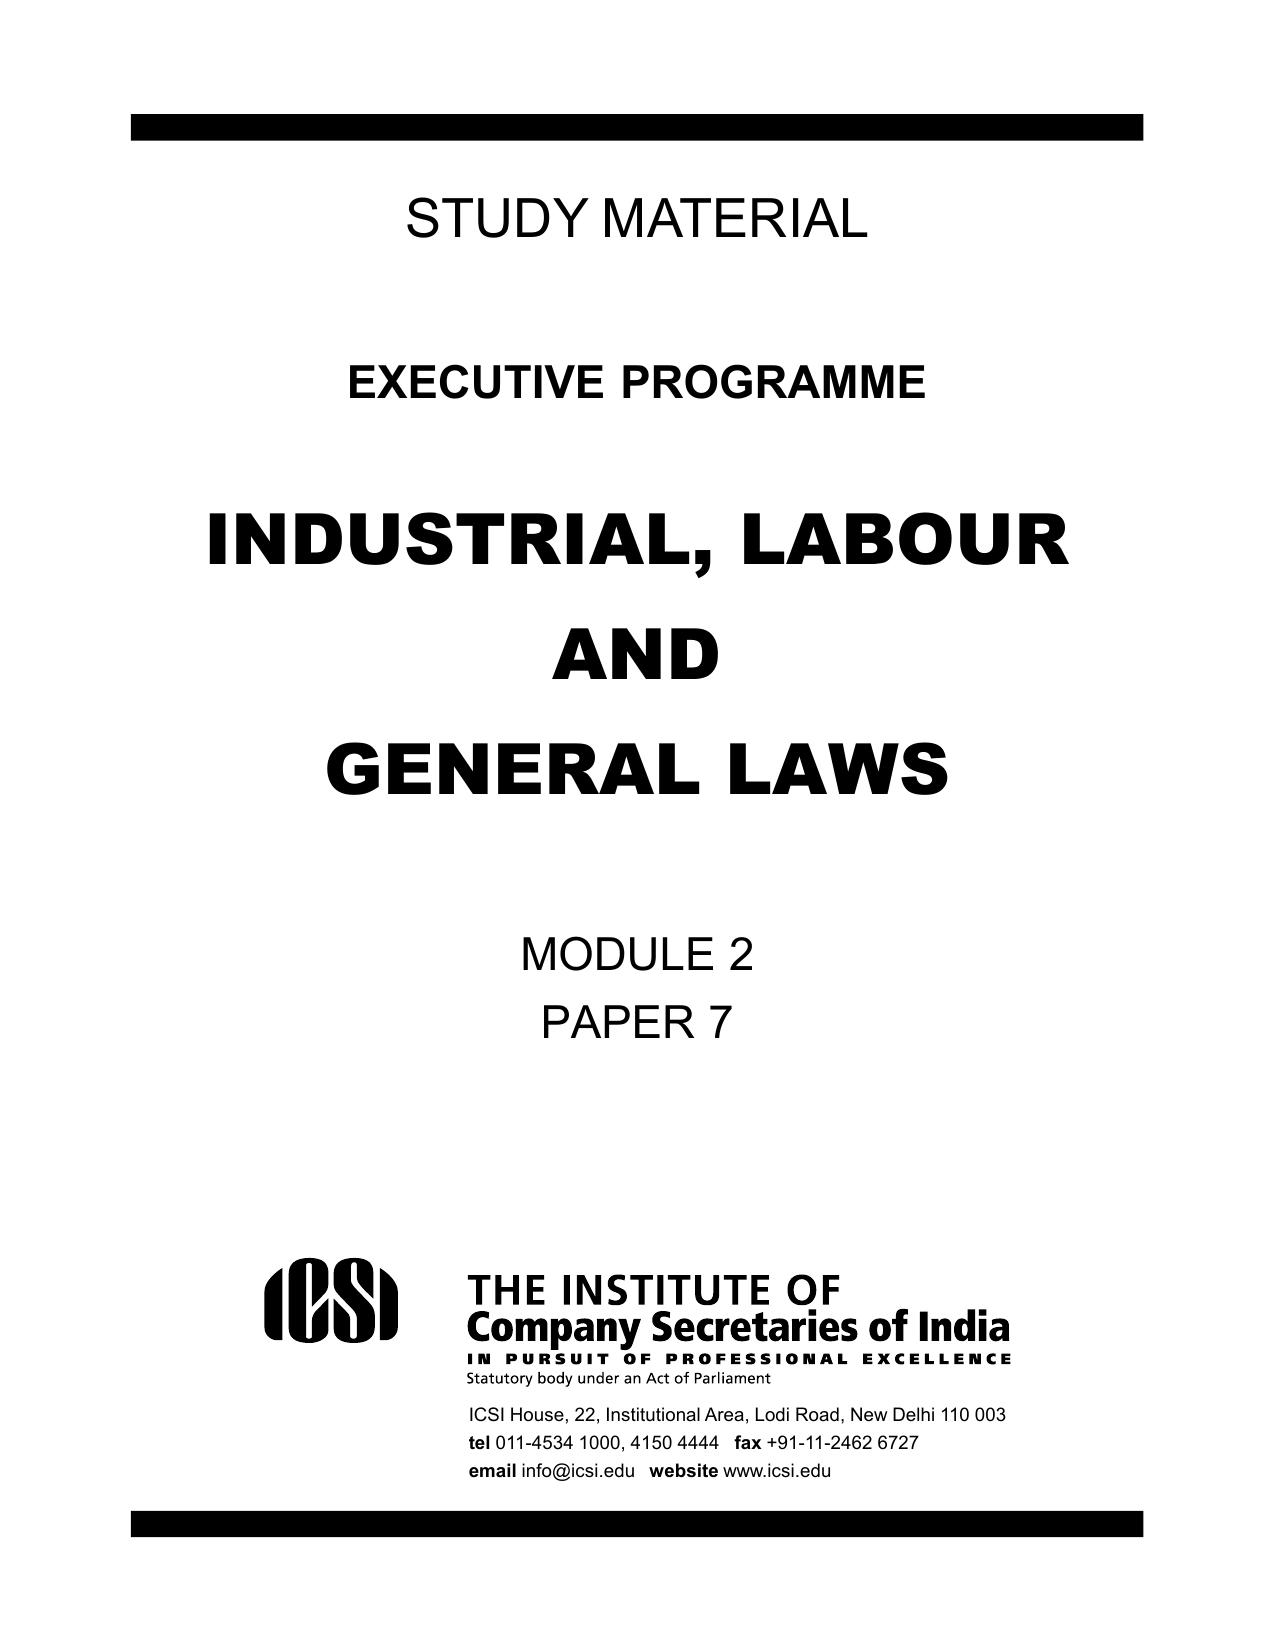 INDUSTRIAL, LABOUR AND GENERAL LAWS 2017